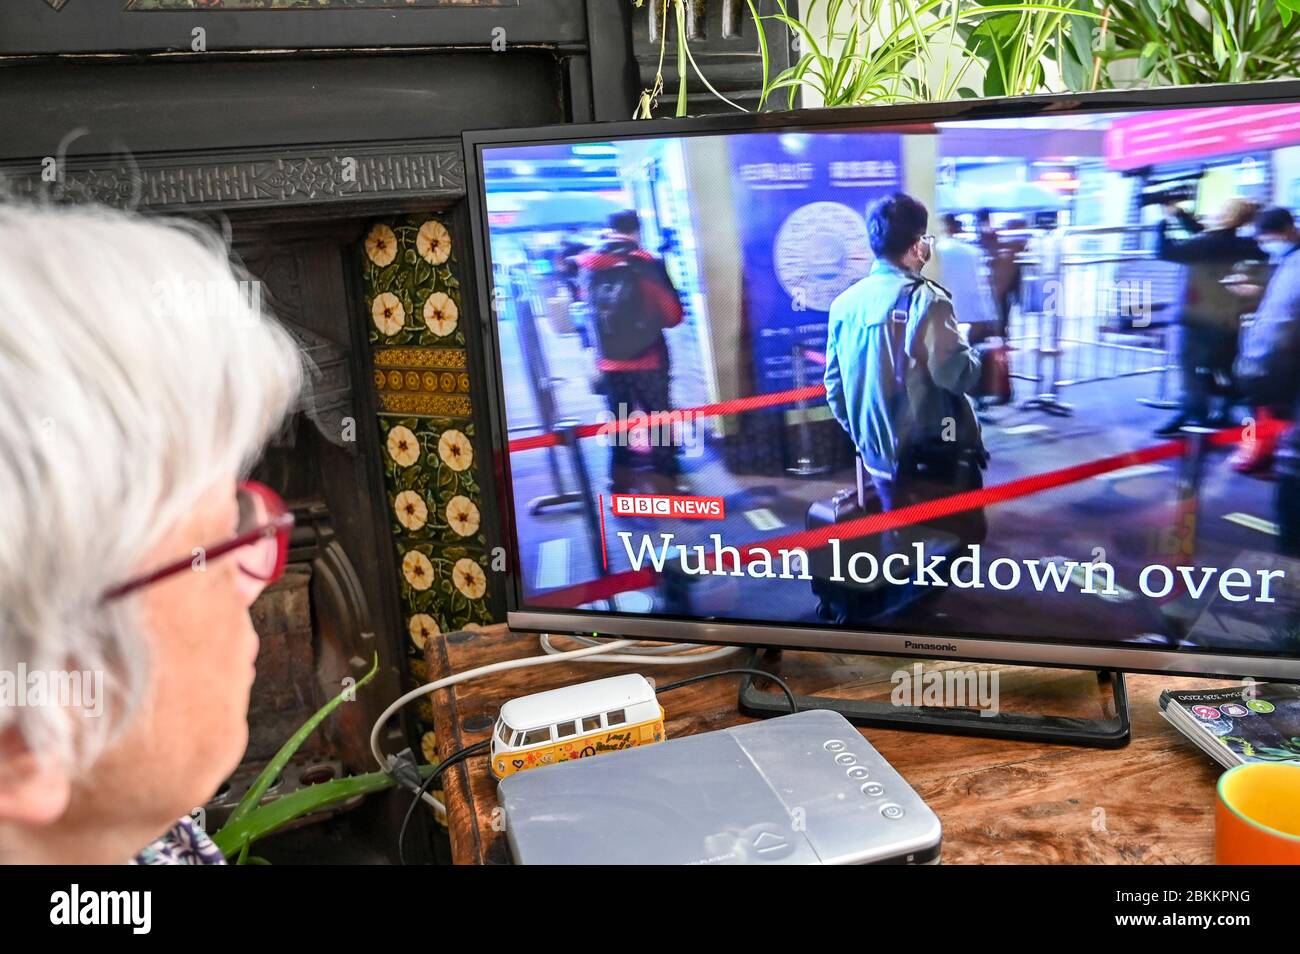 A woman watching BBC news with developements  in Wuhan, China regarding Covid-19 with headline 'Wuhan lockdown over'. Stock Photo